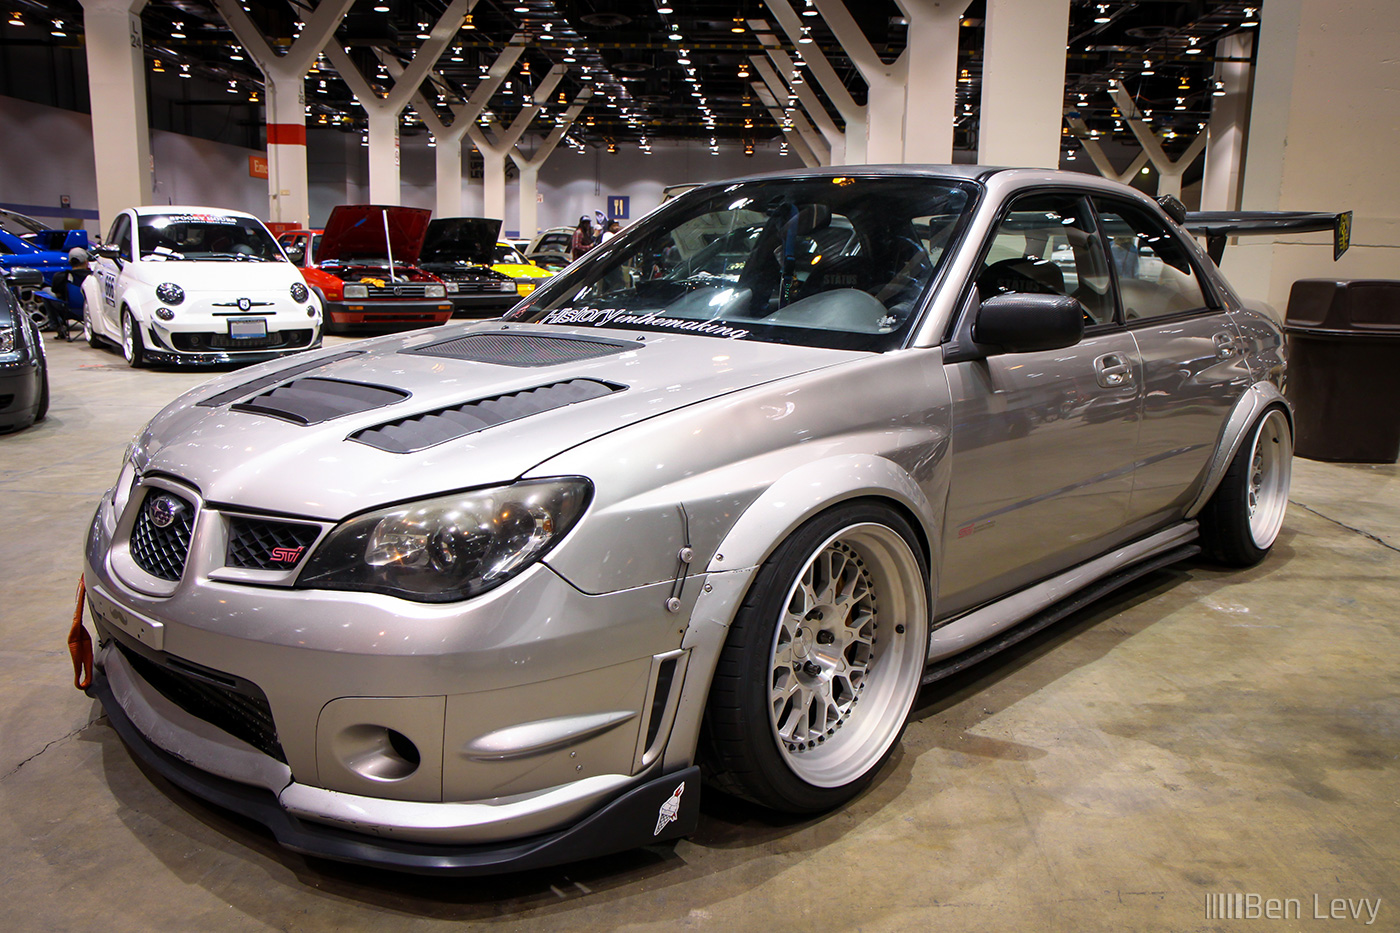 Silver WRX STI with vented hood